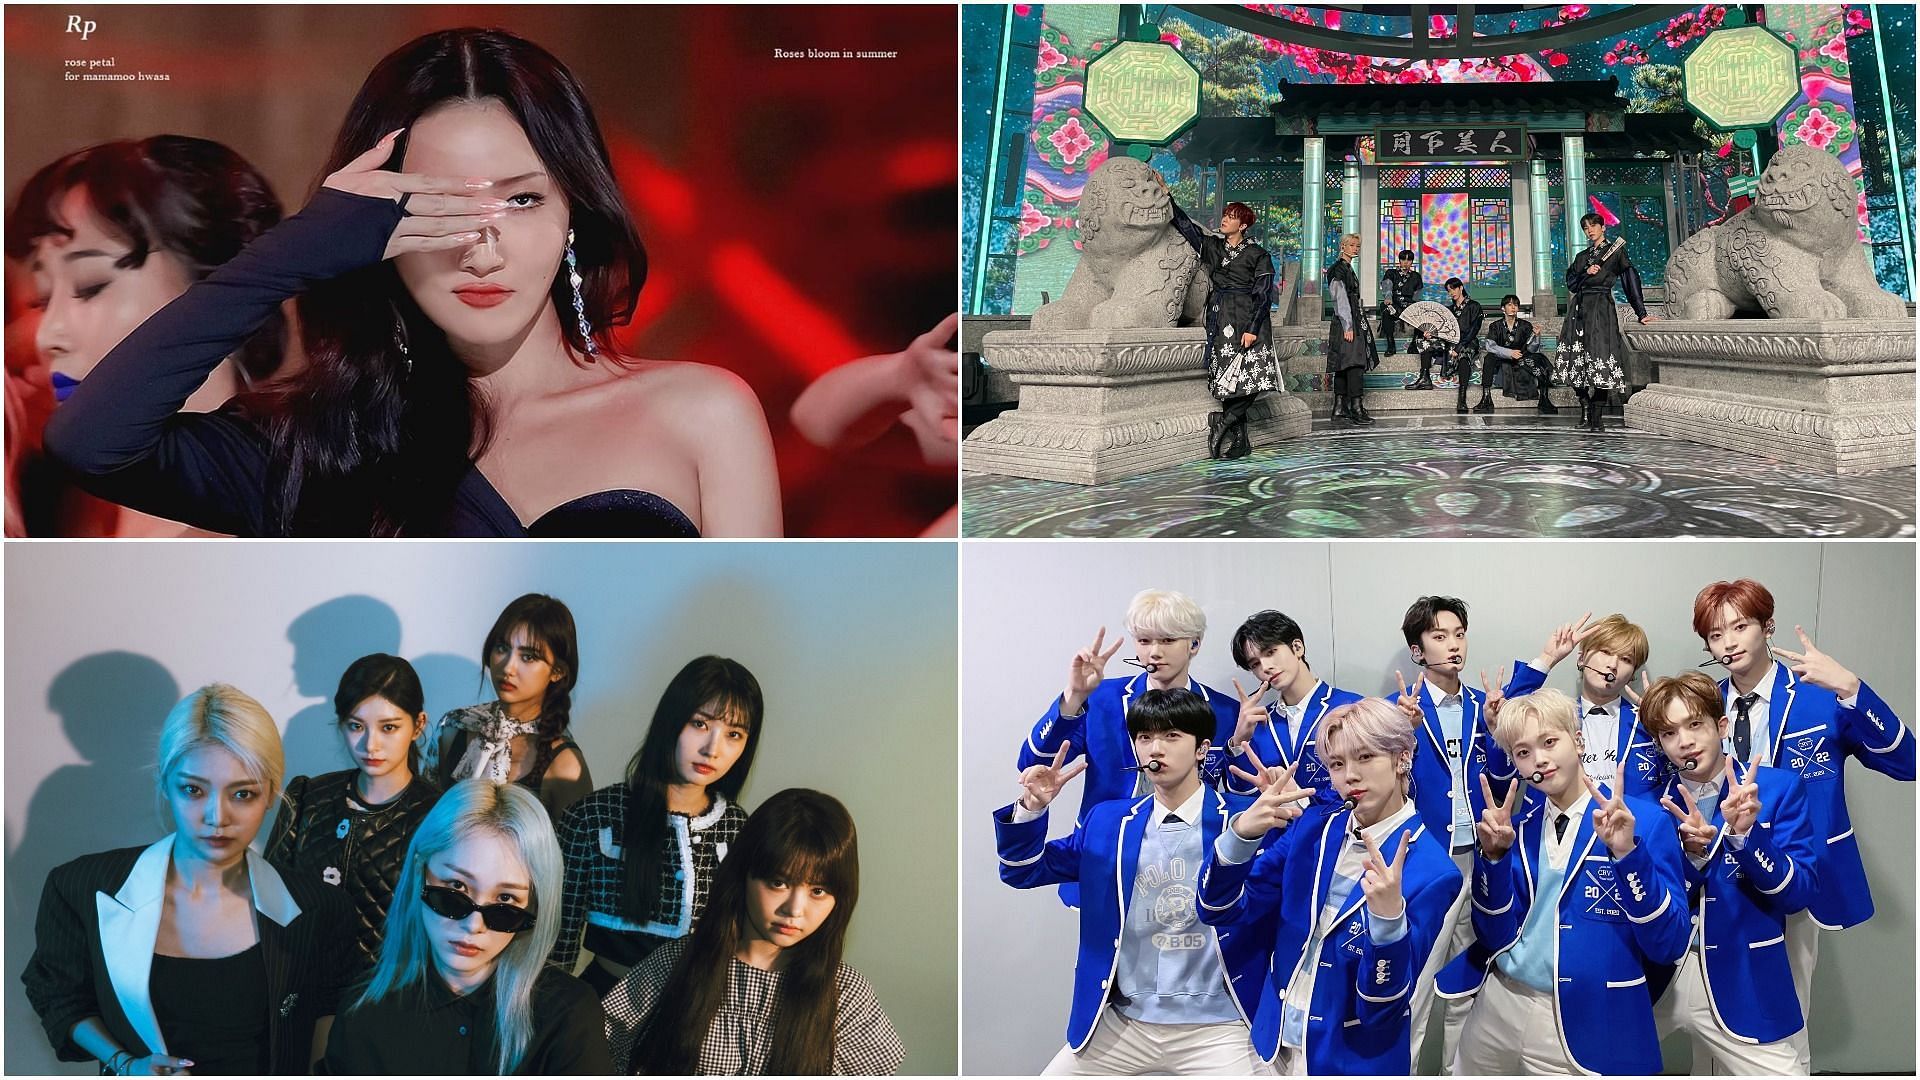 Hwasa, EVERGLOW, ONEUS, and CRAVITY (Images via Getty Images, @EVERGLOW_STAFF/Twitter, @official_ONEUS/Twitter, @CRAVITY_twt/Twitter)